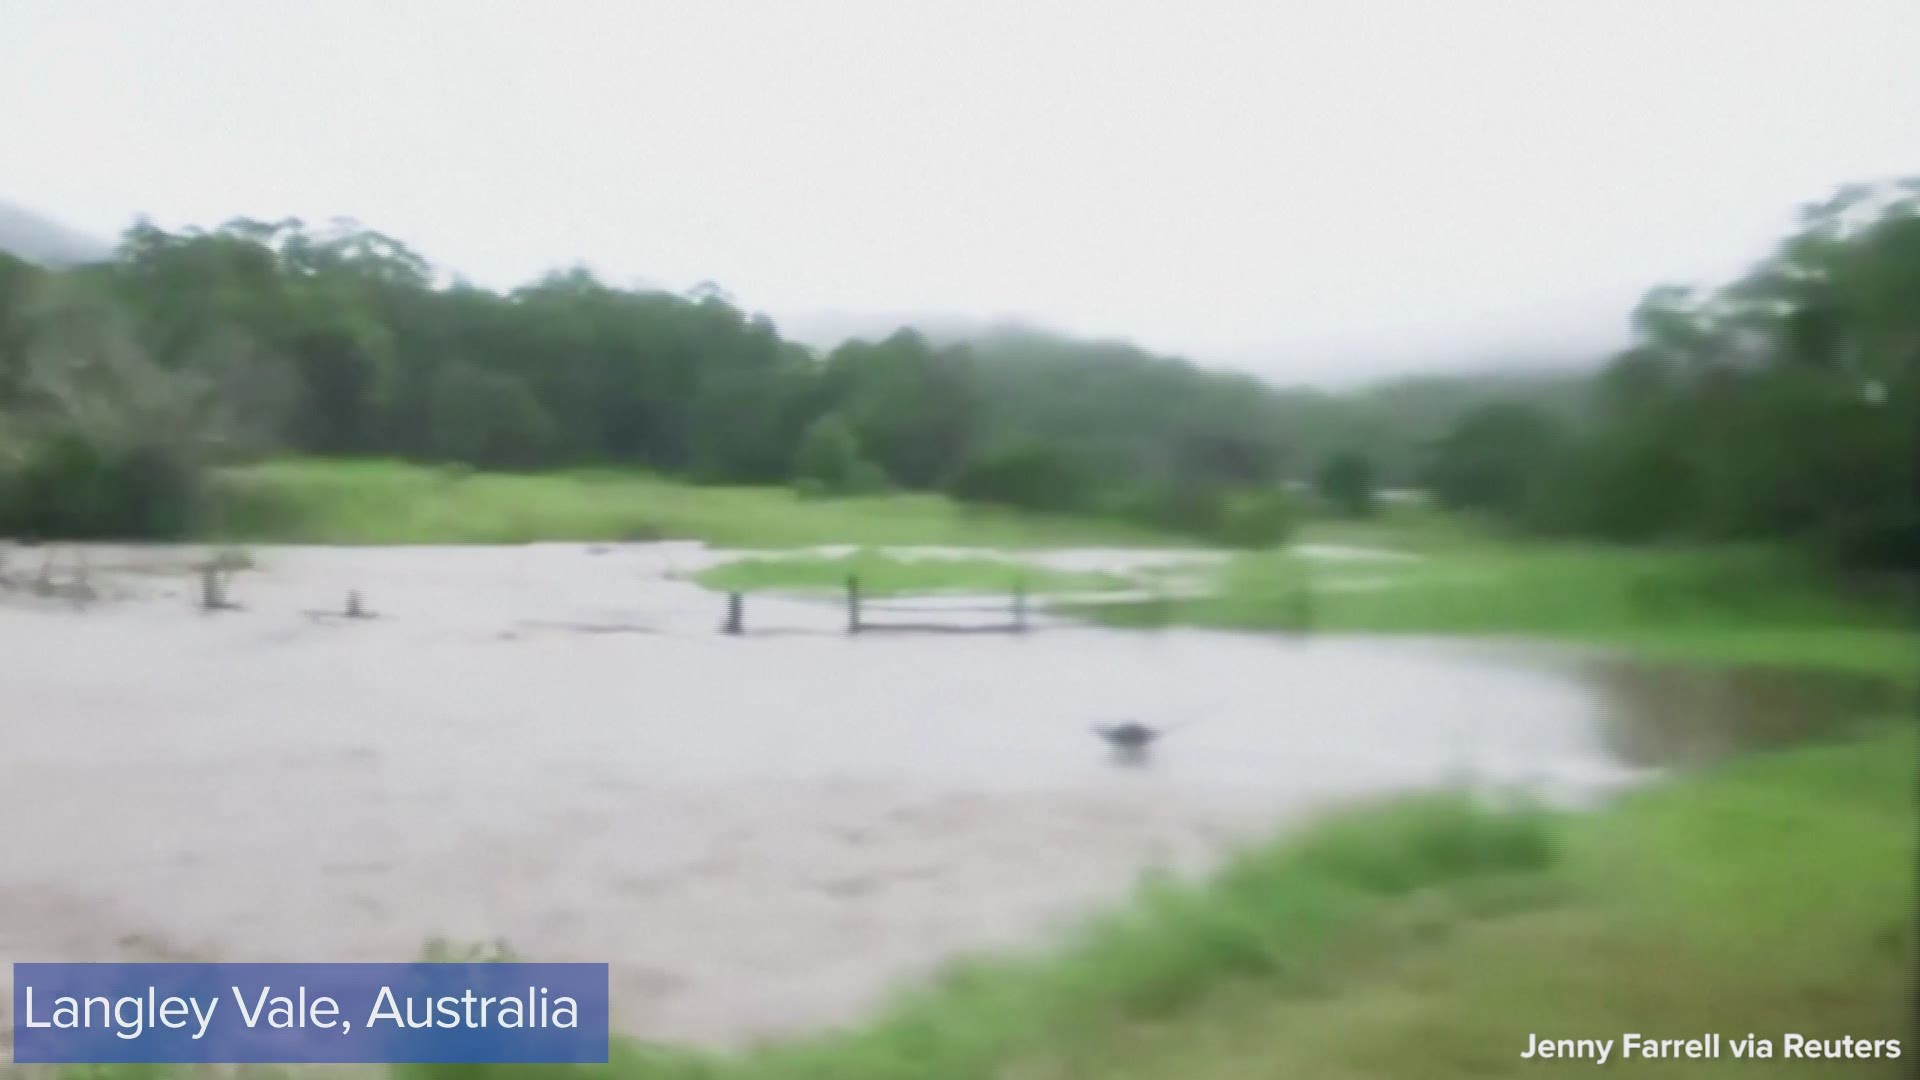 CLOSE CALL! This kangaroo narrowly escaped being swept away by floodwater in Australia on Friday (3/19).